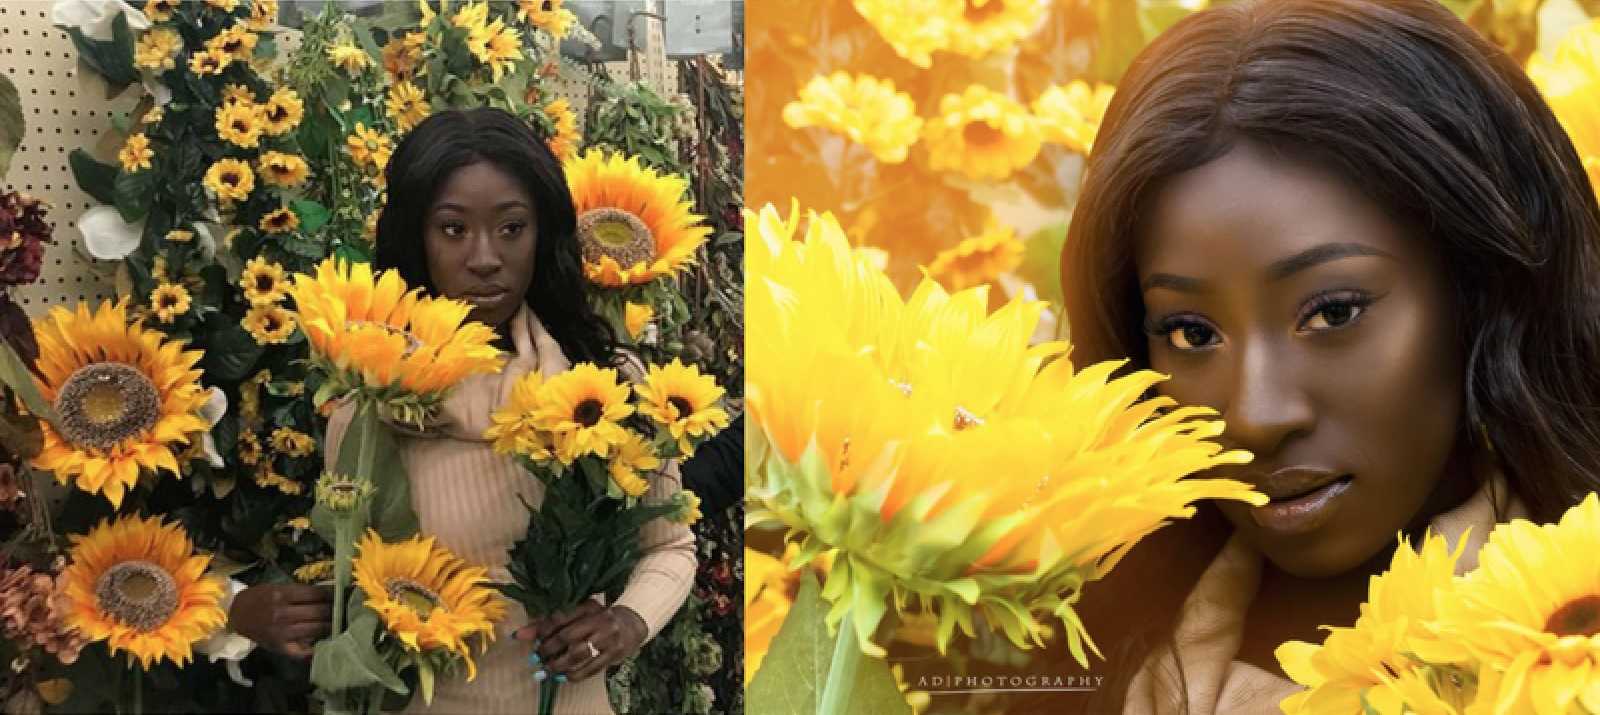 woman holding sunflowers at hobby lobby before and after editing